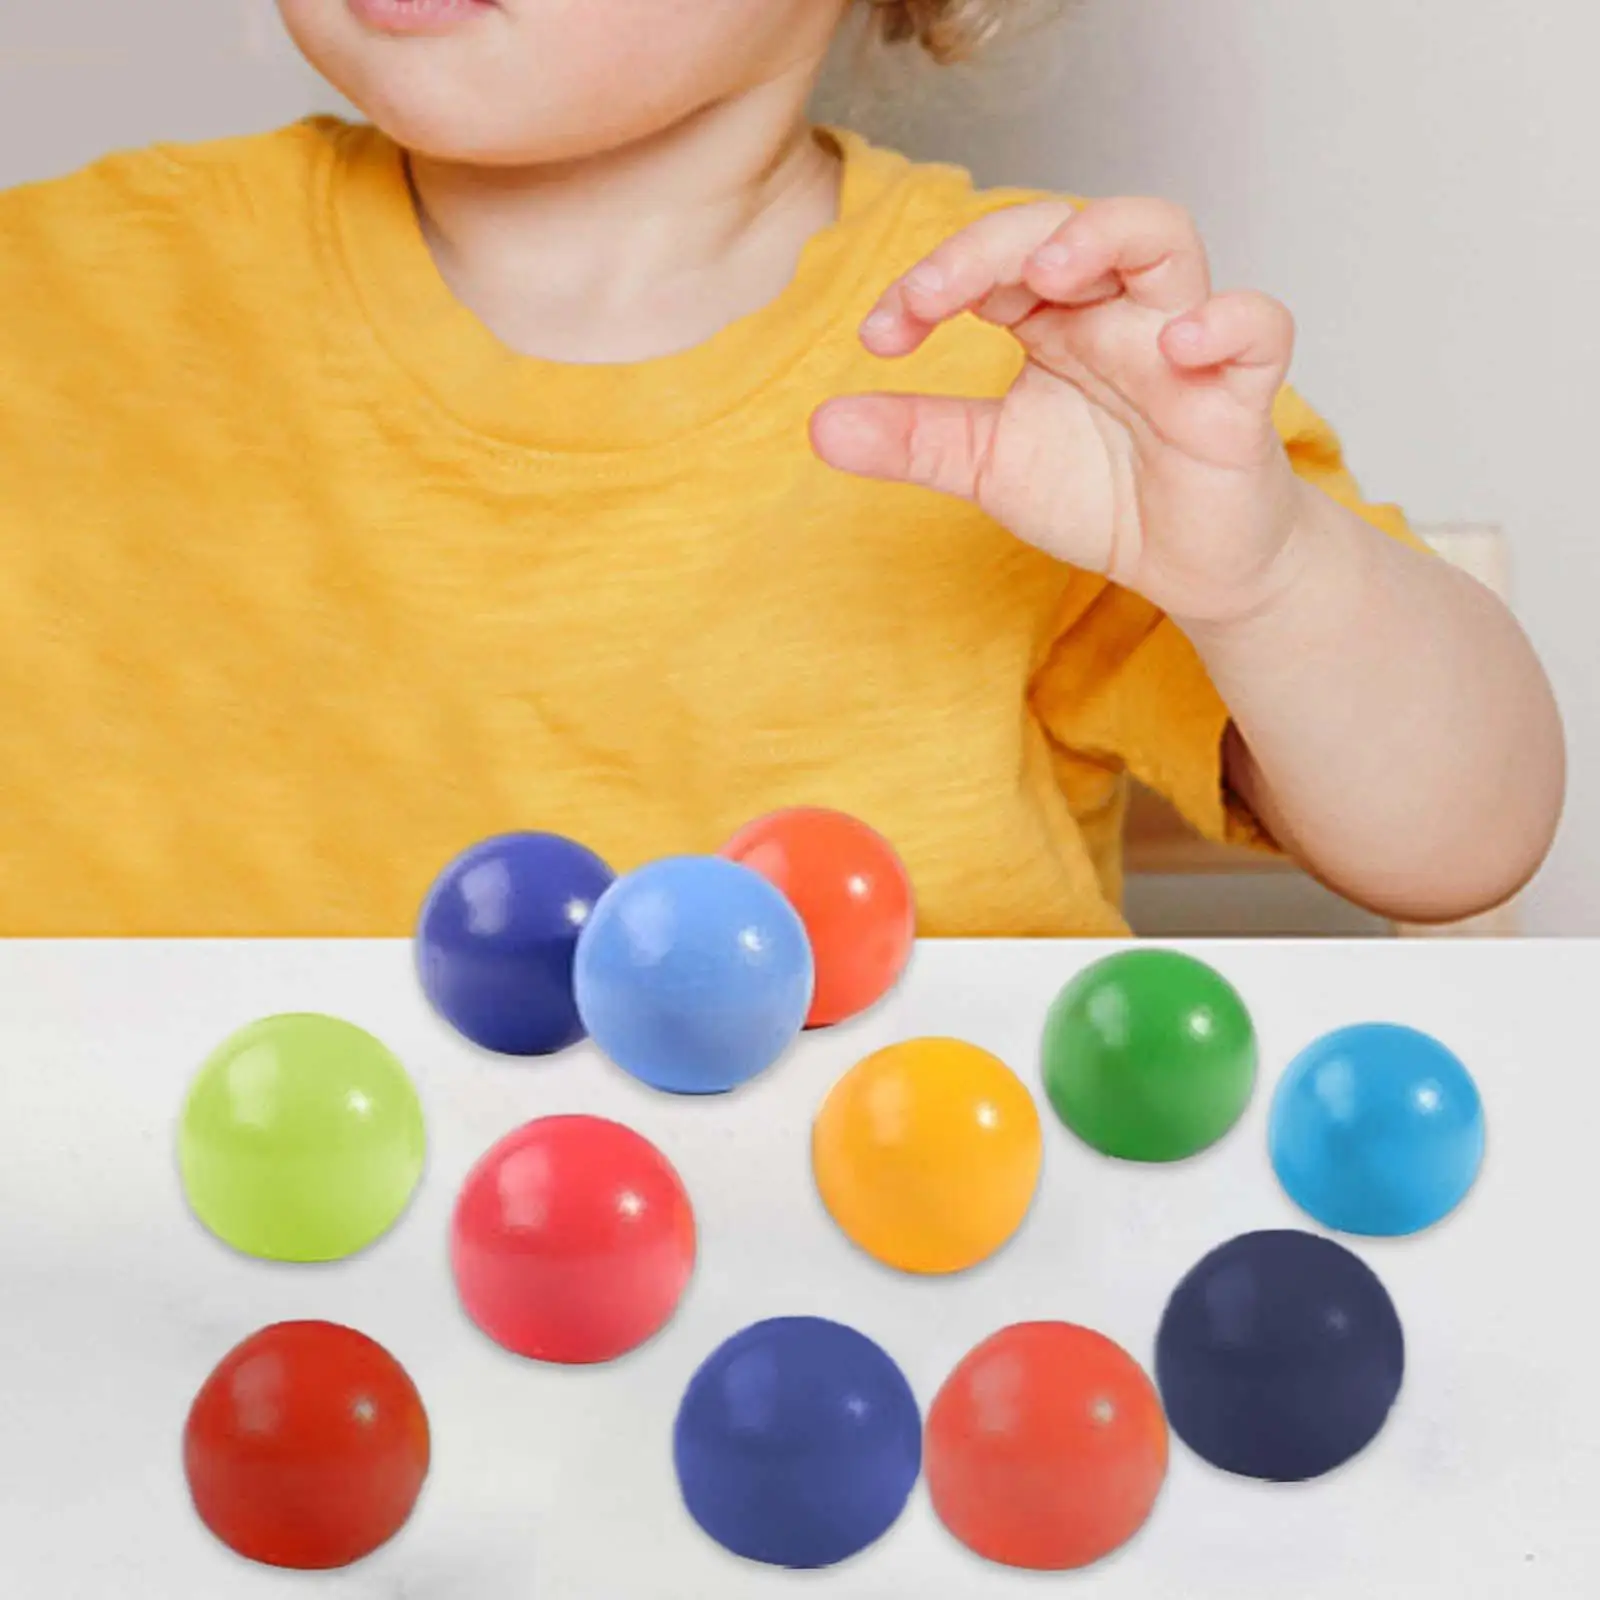 12 Pieces Montessori Multicolored Ball Set Early Educational Toys Ball Educational Counting Toy for Children Girls Kids